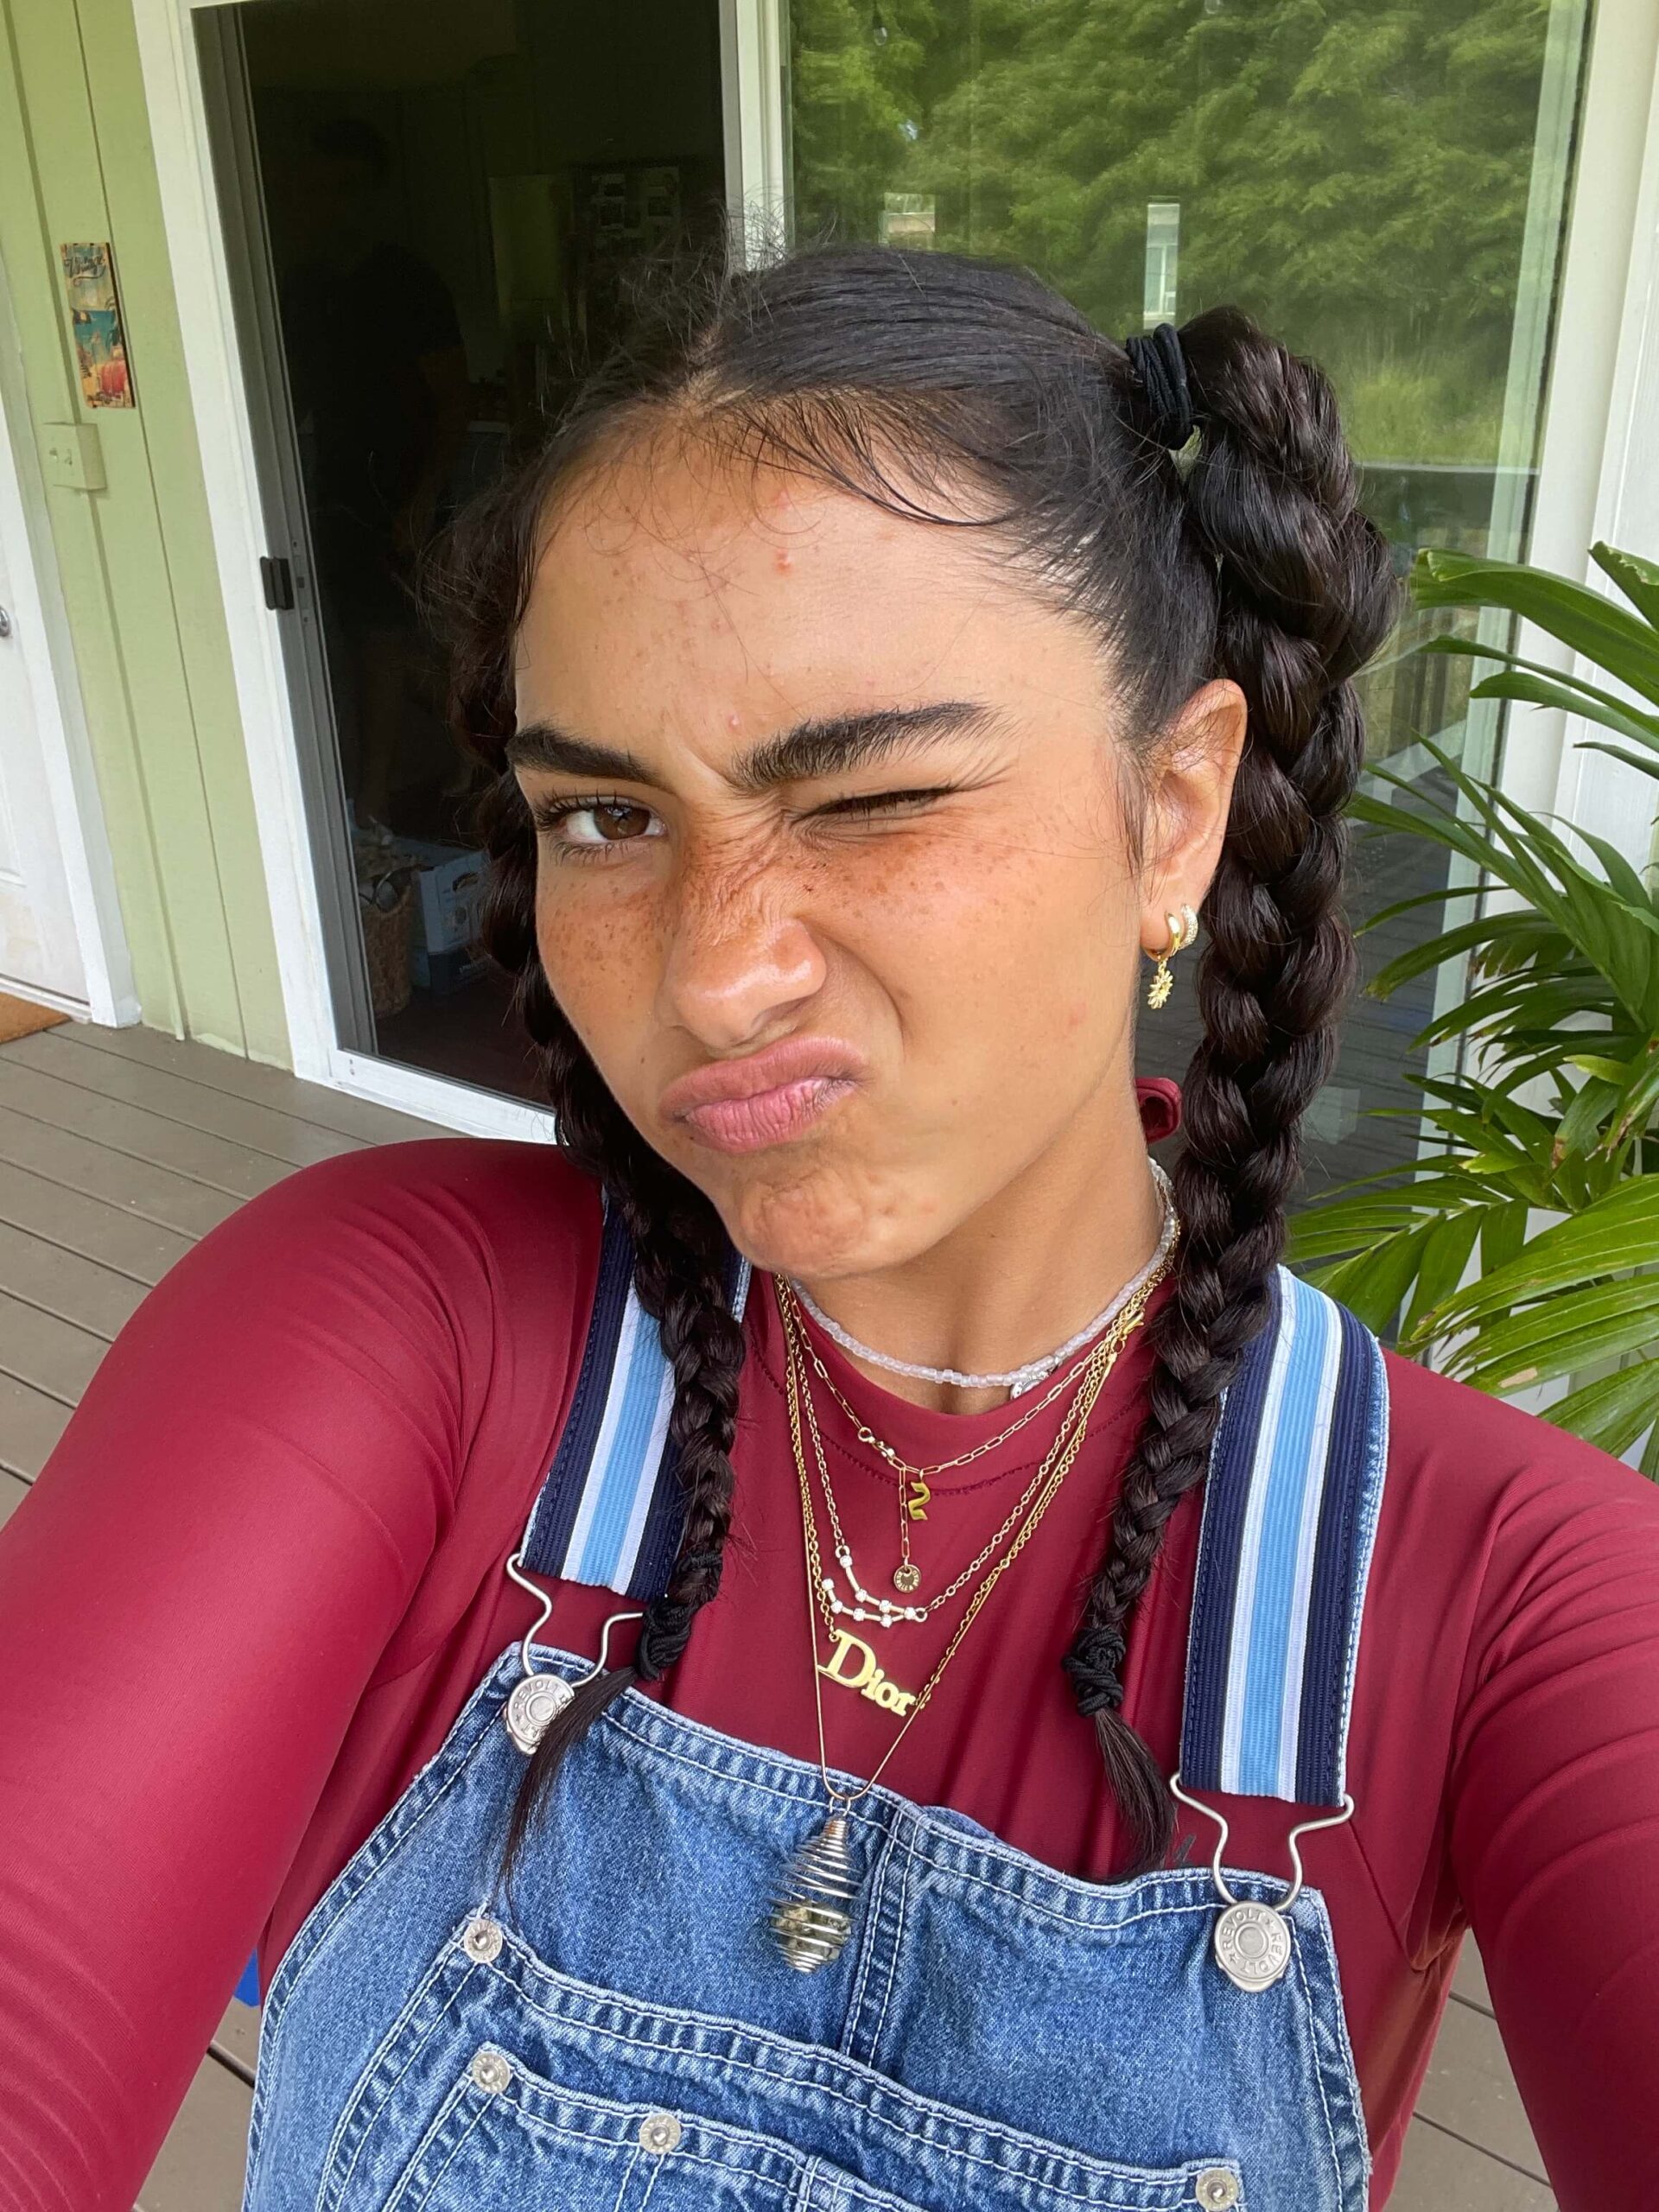 Girl with two braids, freckles, wearing overalls and a red long sleeve shirt with gold necklaces around her neck